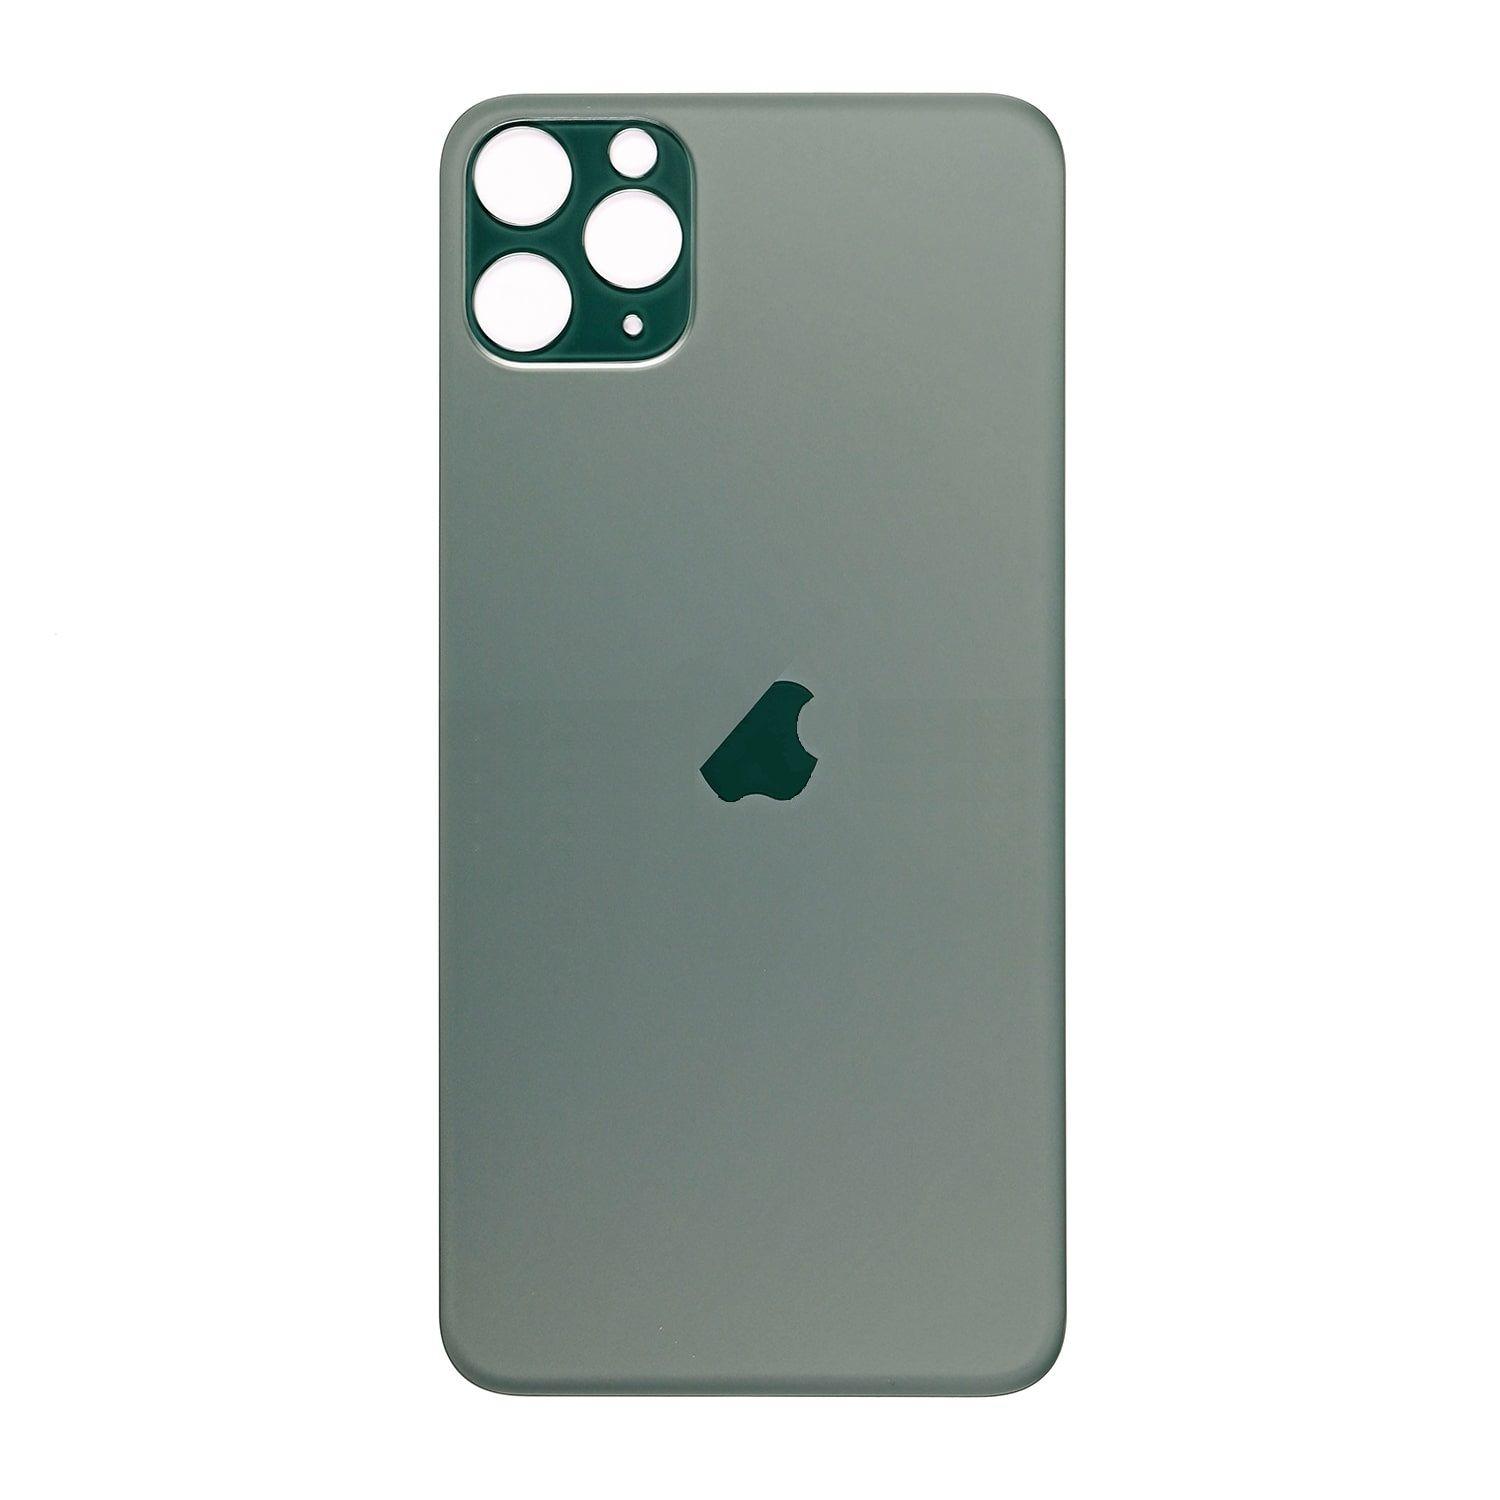 Iphone 11 pro max green flip without camera glass